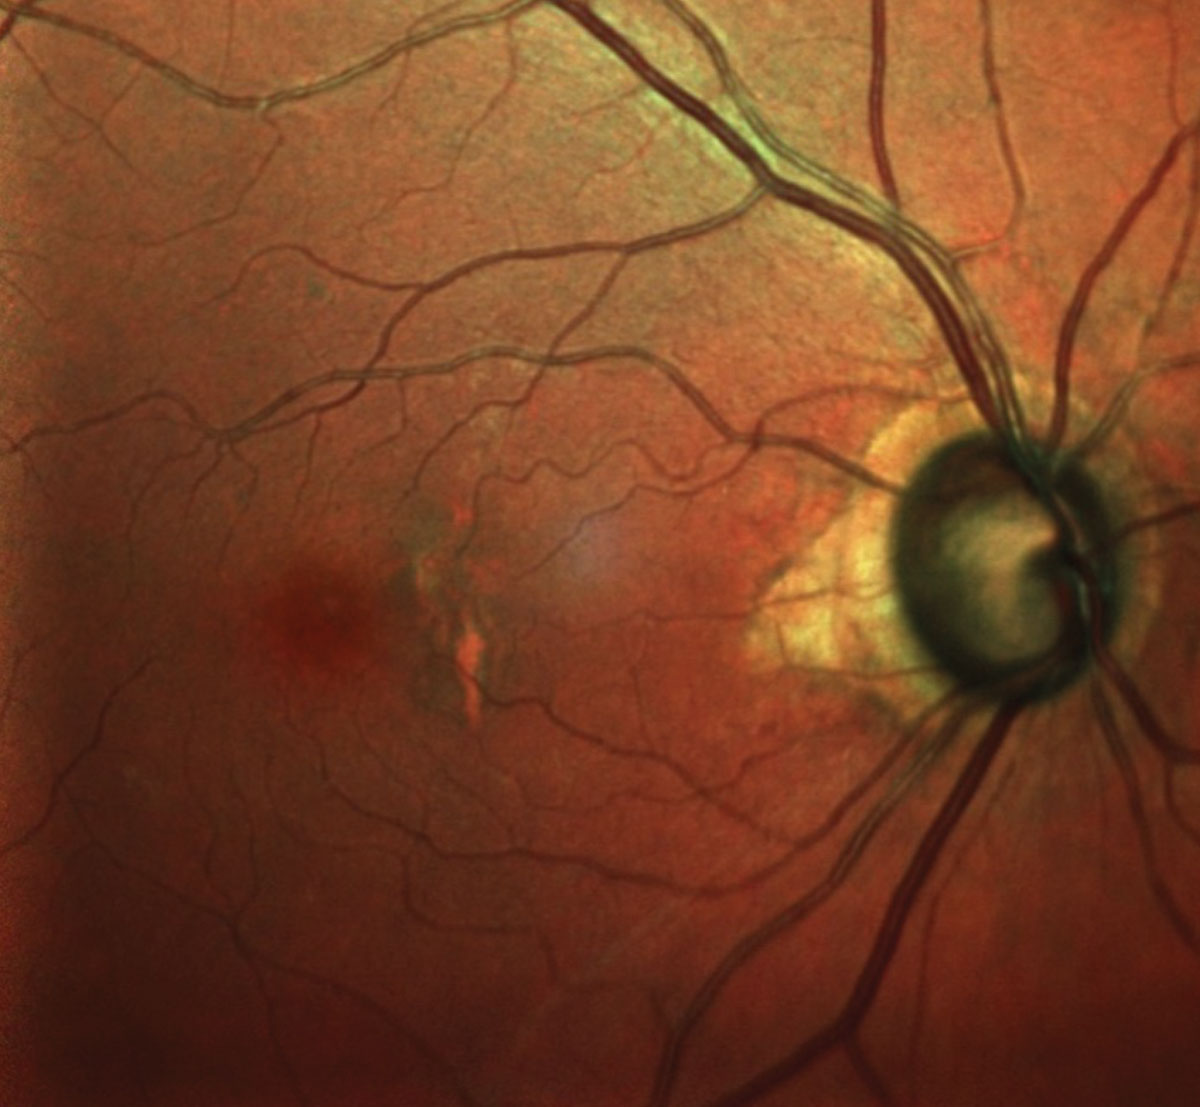 The patient’s right eye, shows advanced glaucomatous damage and macular changes consistent with her age.